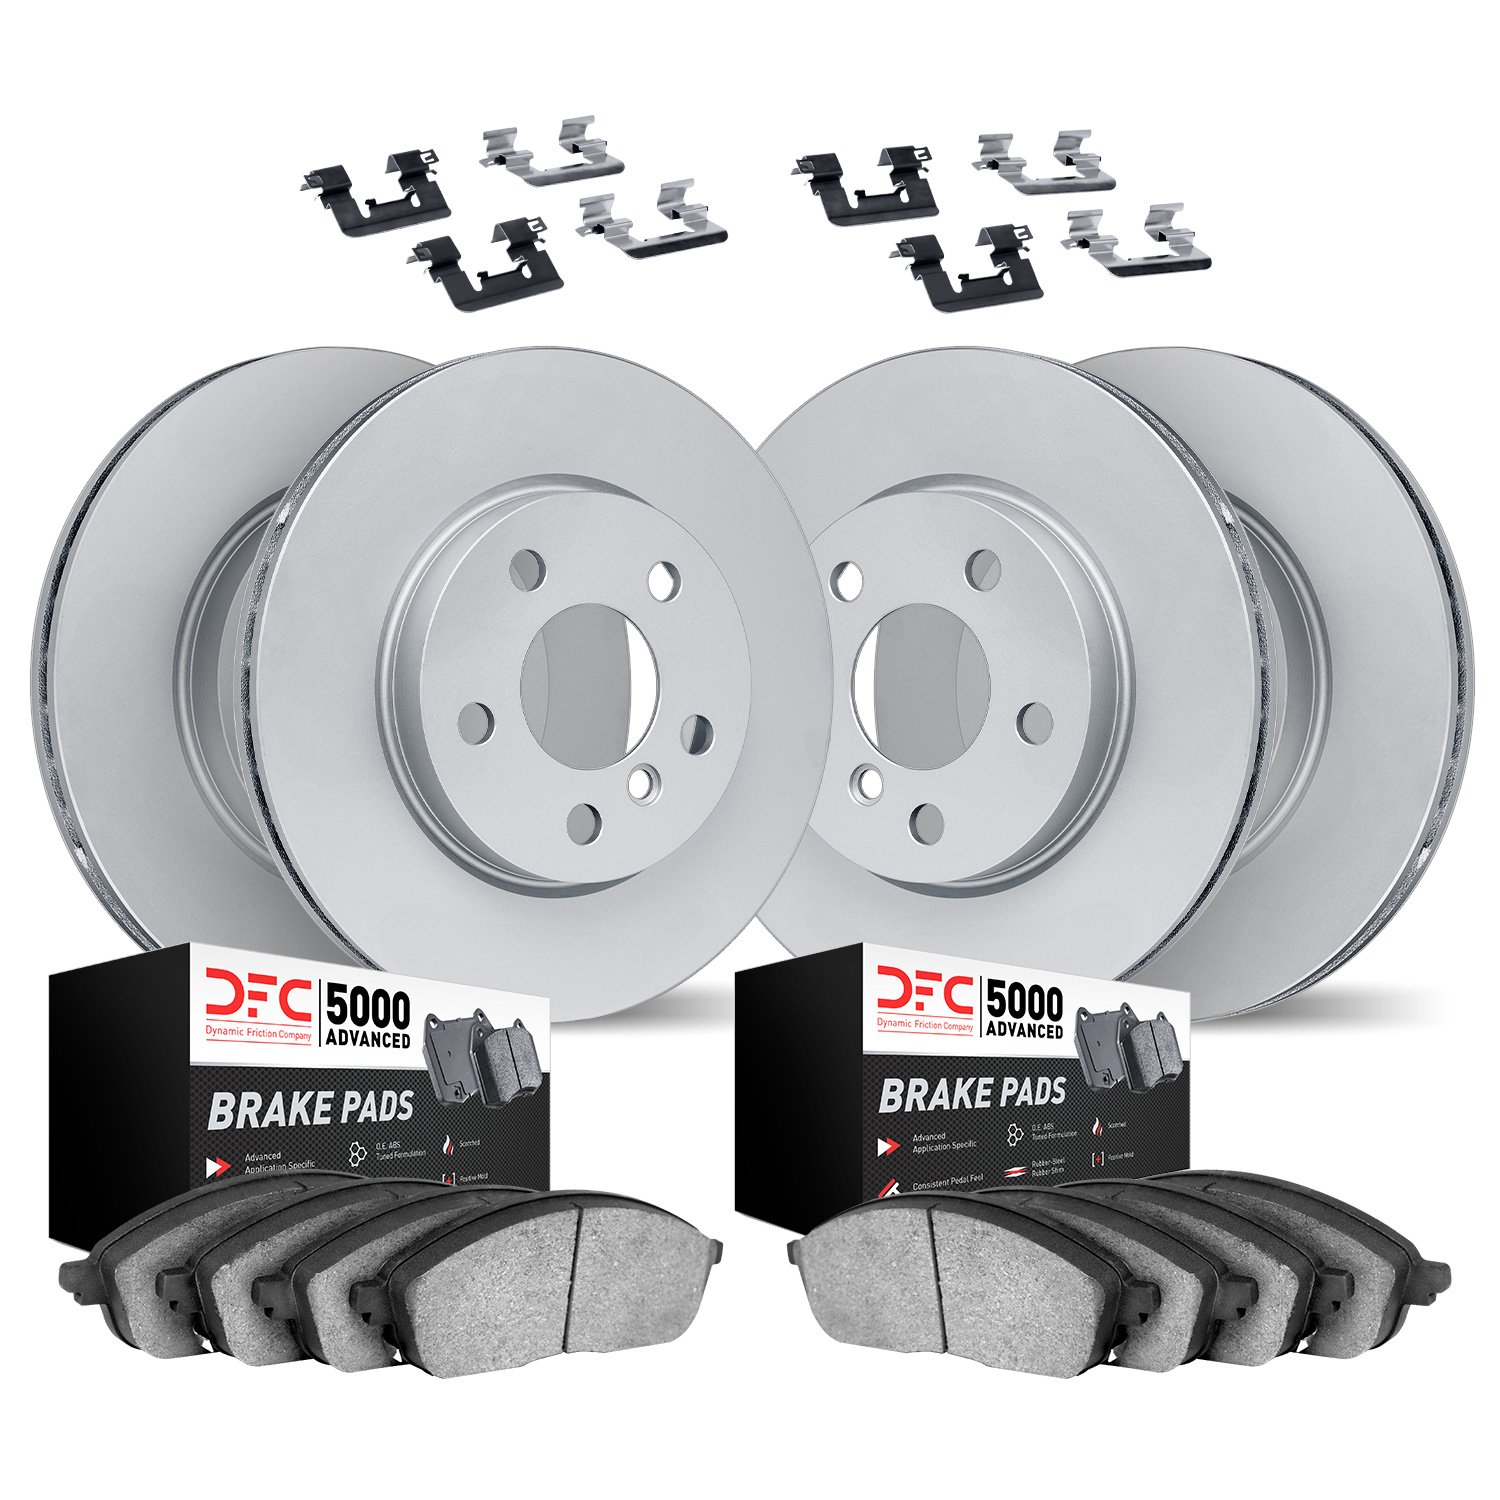 9514-31166 GEOMET Brake Rotors w/5000 Advanced Brake Pads Kit & Hardware, Fits Select BMW, Position: Front and Rear